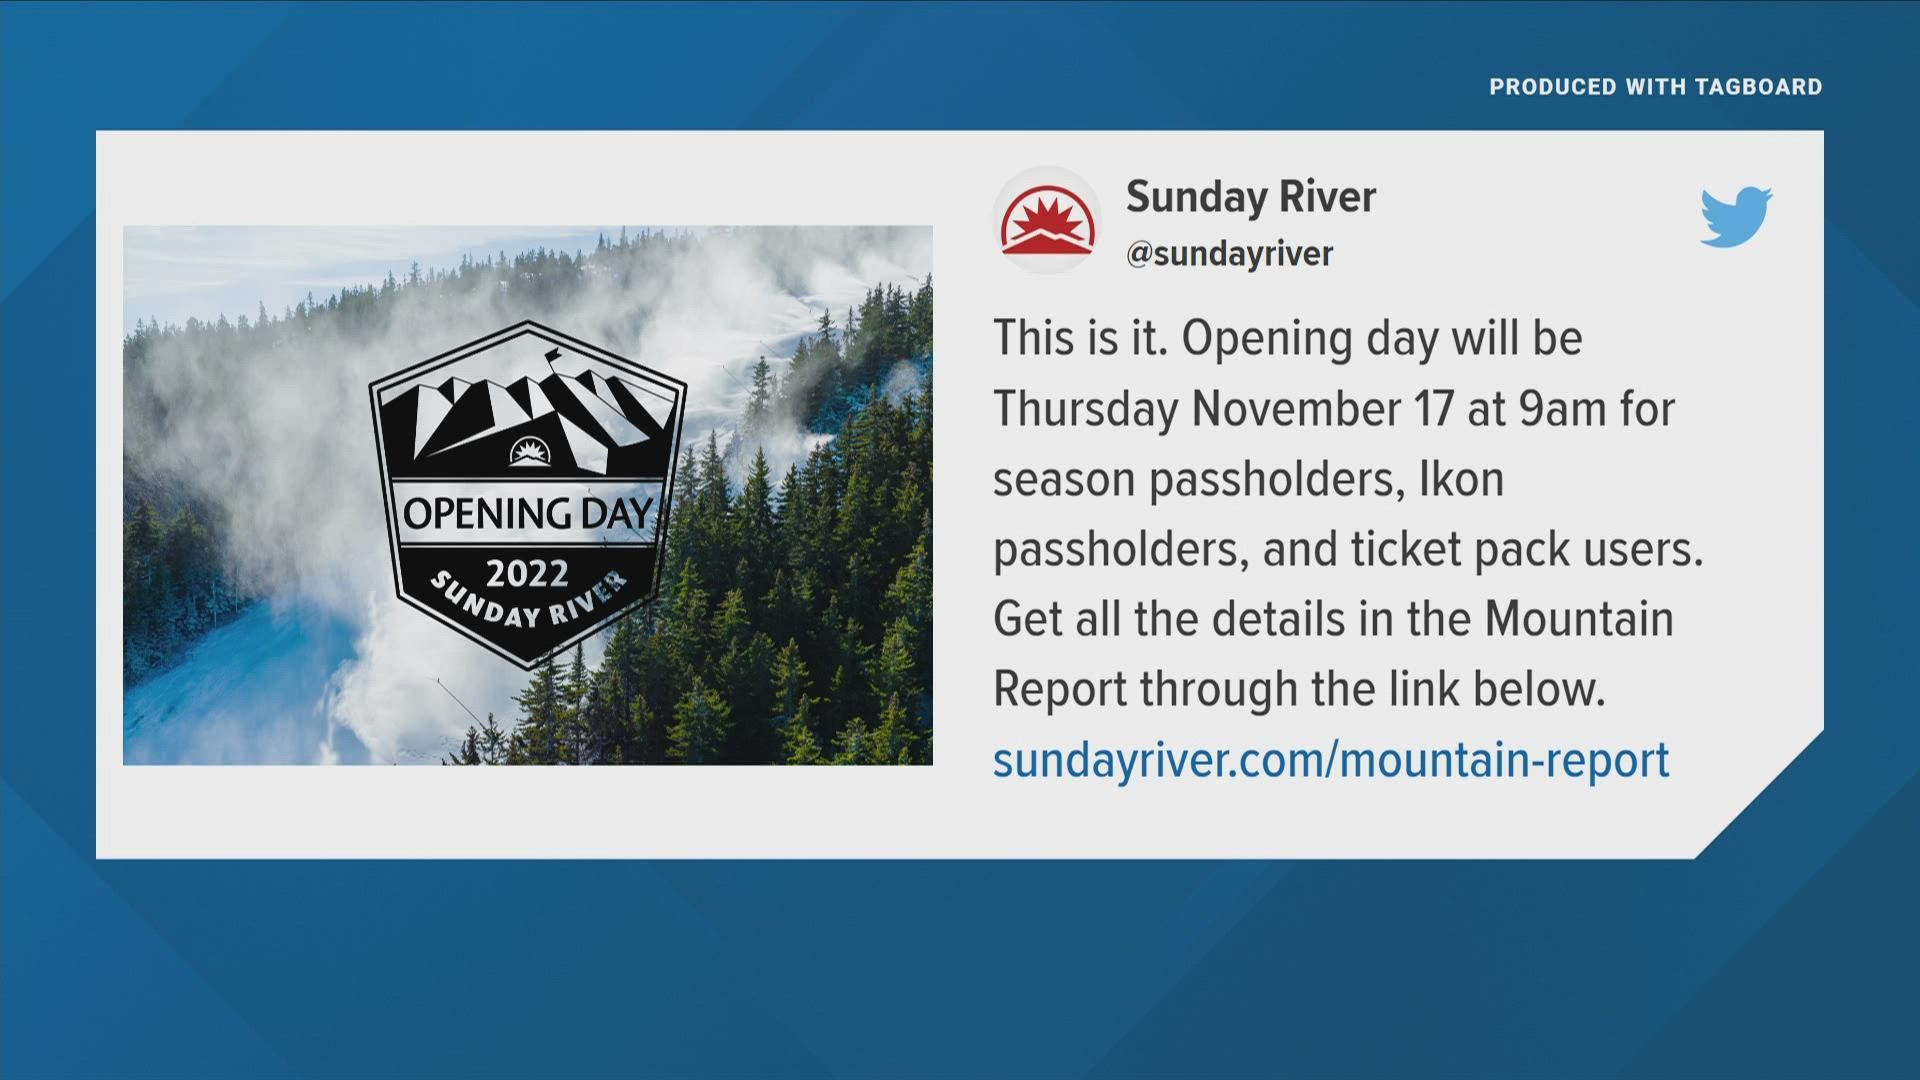 Sunday River Resort is set to open on Thursday, Nov. 17, and Sugarloaf is set to open on Friday, Nov. 18.